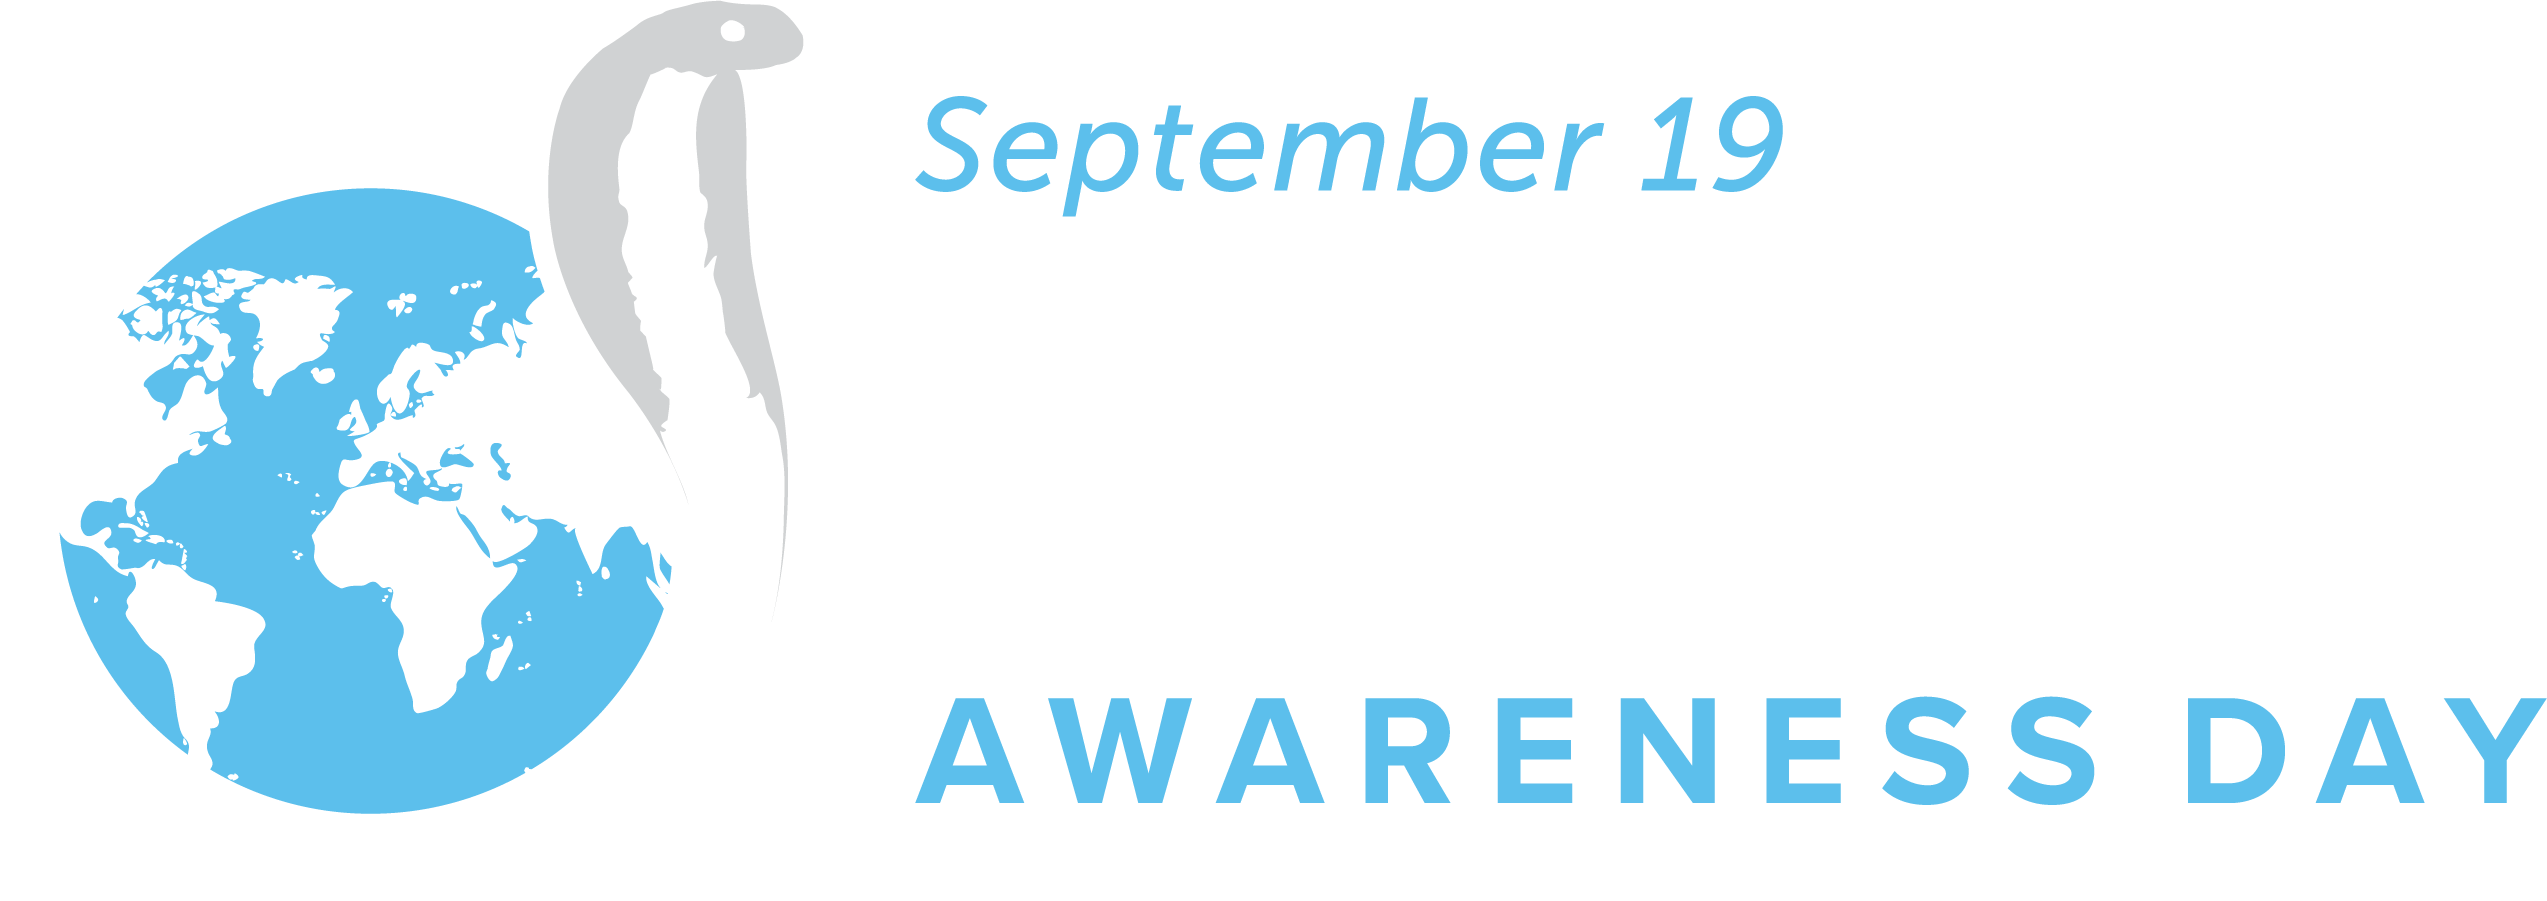 To Die for Logo - International Snakebite Awareness Day | Minutes to Die